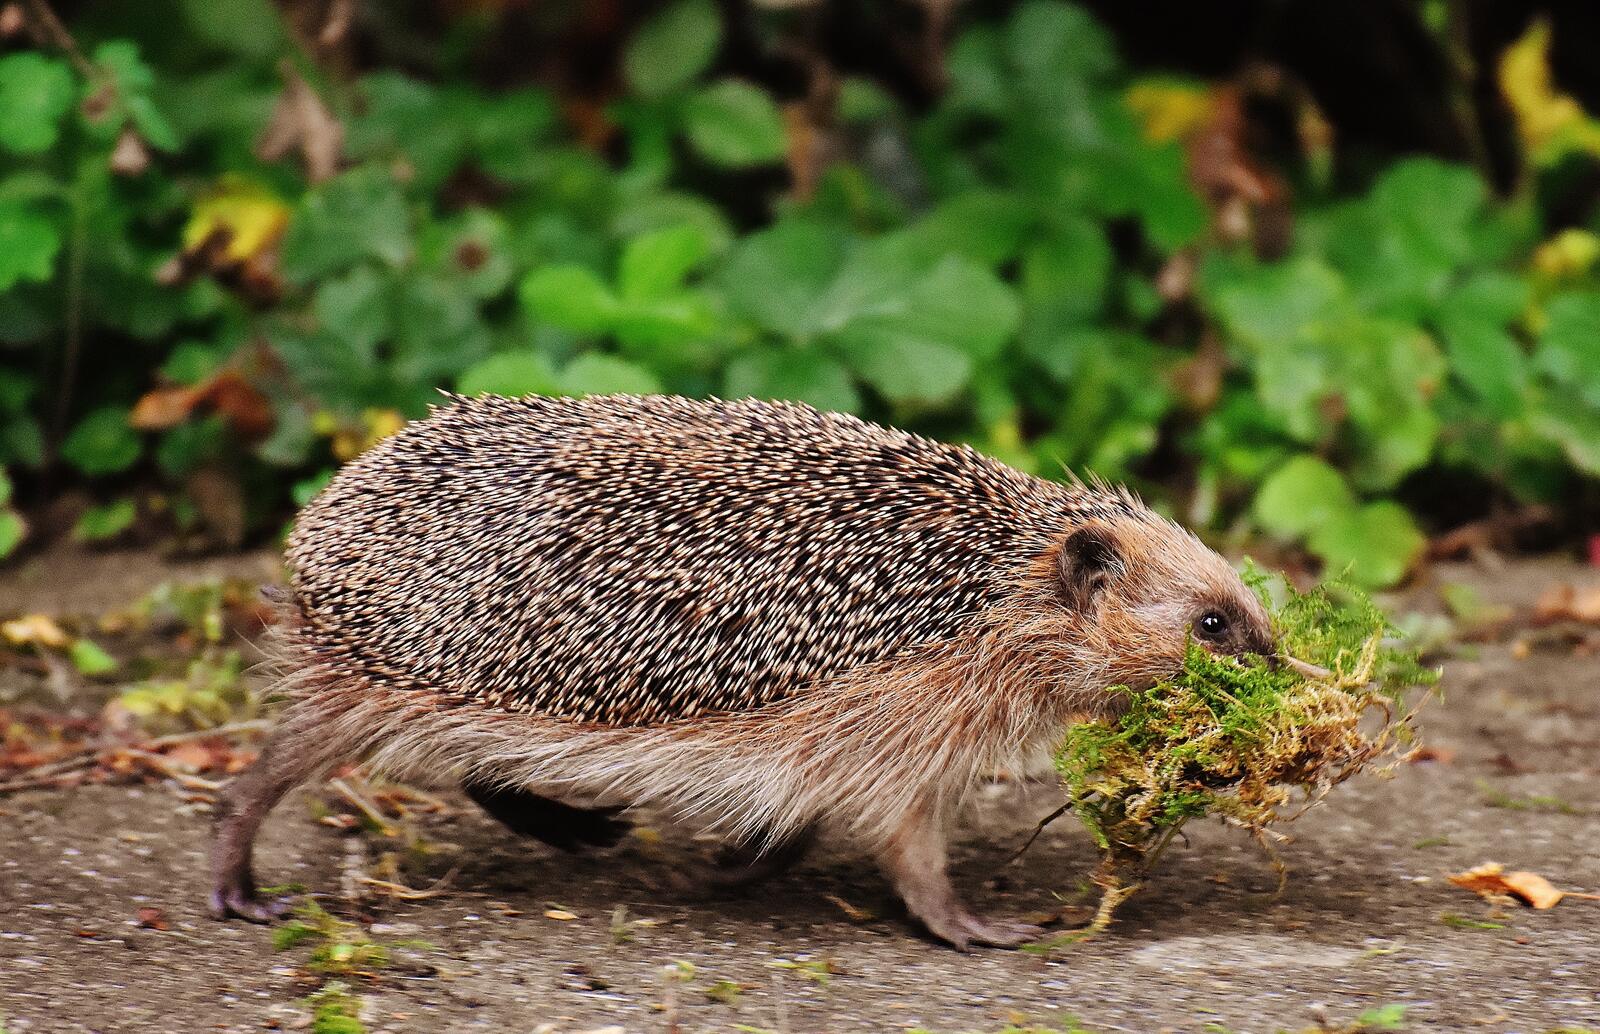 Free photo A hedgehog carries moss to build a dwelling.